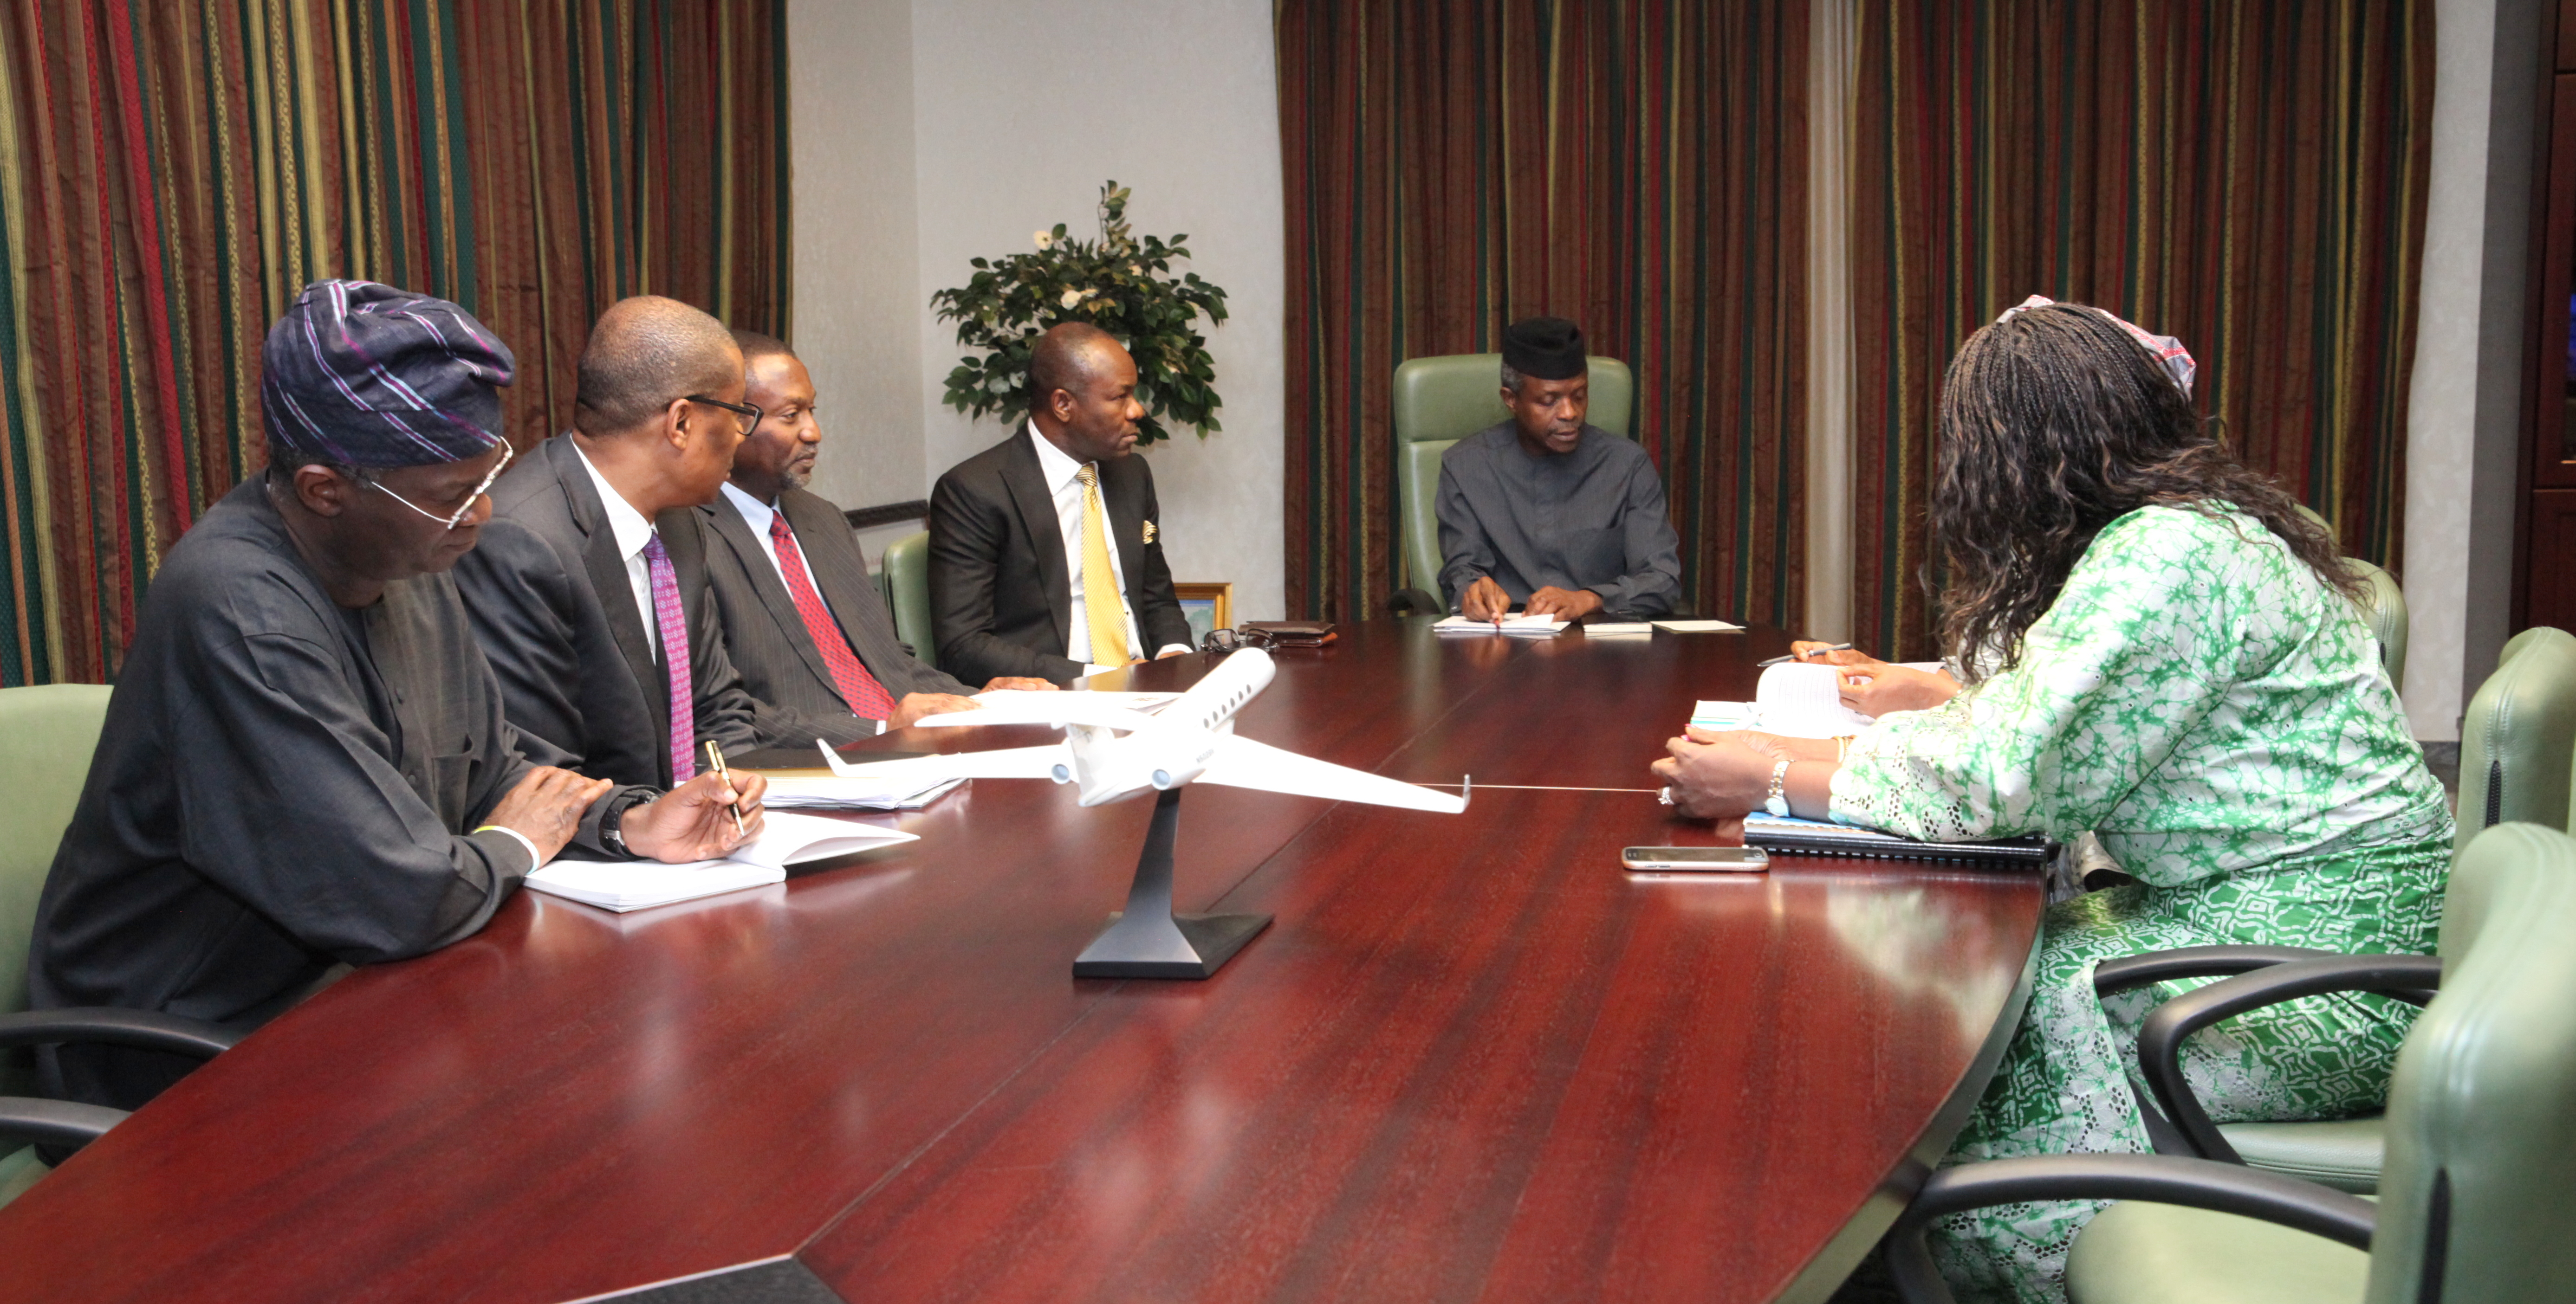 VP Osinbajo Presides Over Budget & Planning Meeting With Ministers On 12/11/2015